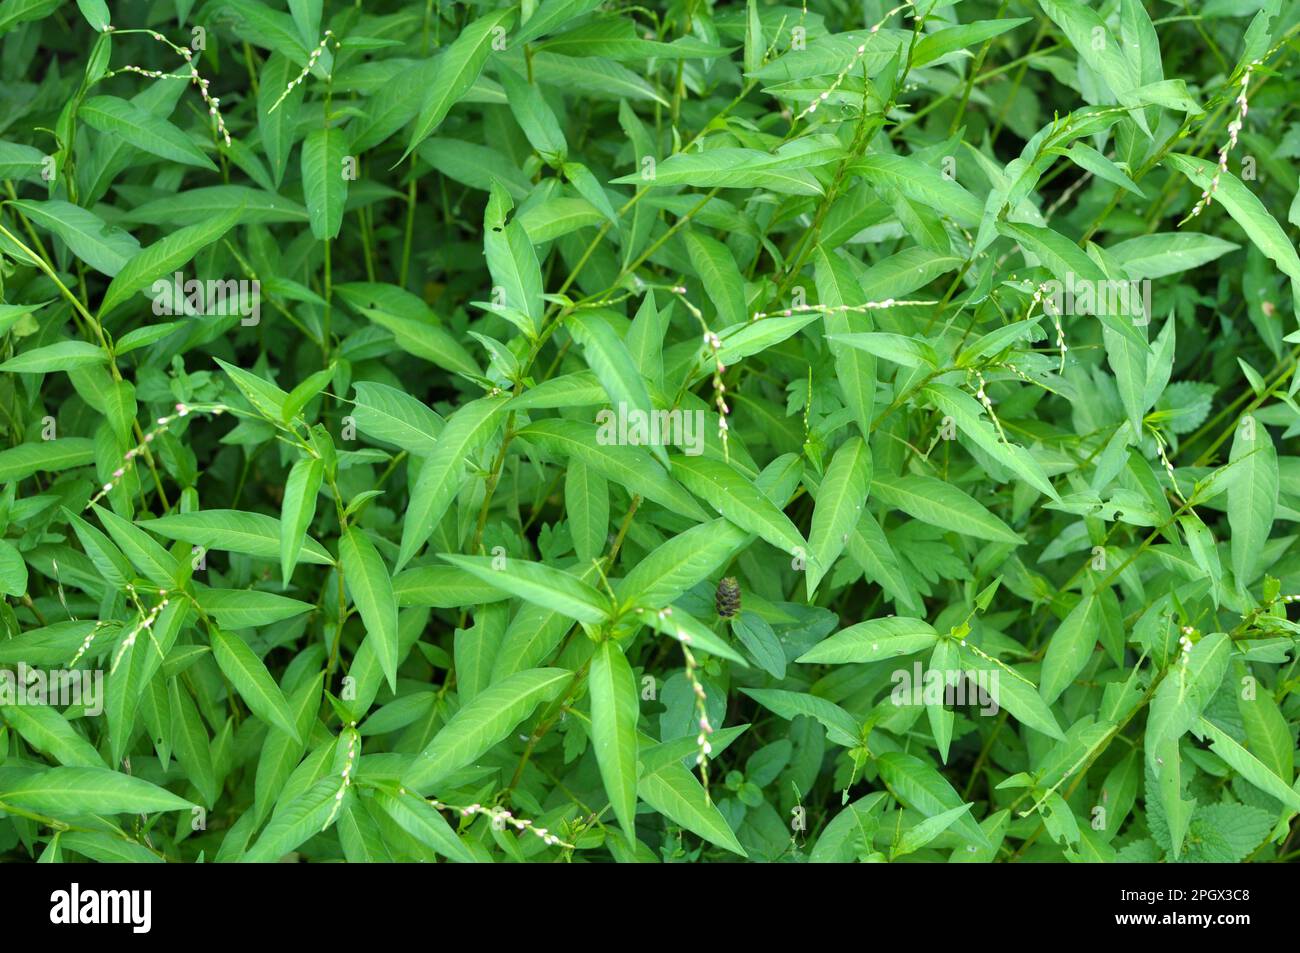 Persicaria hydropiper grows among grasses in the wild Stock Photo